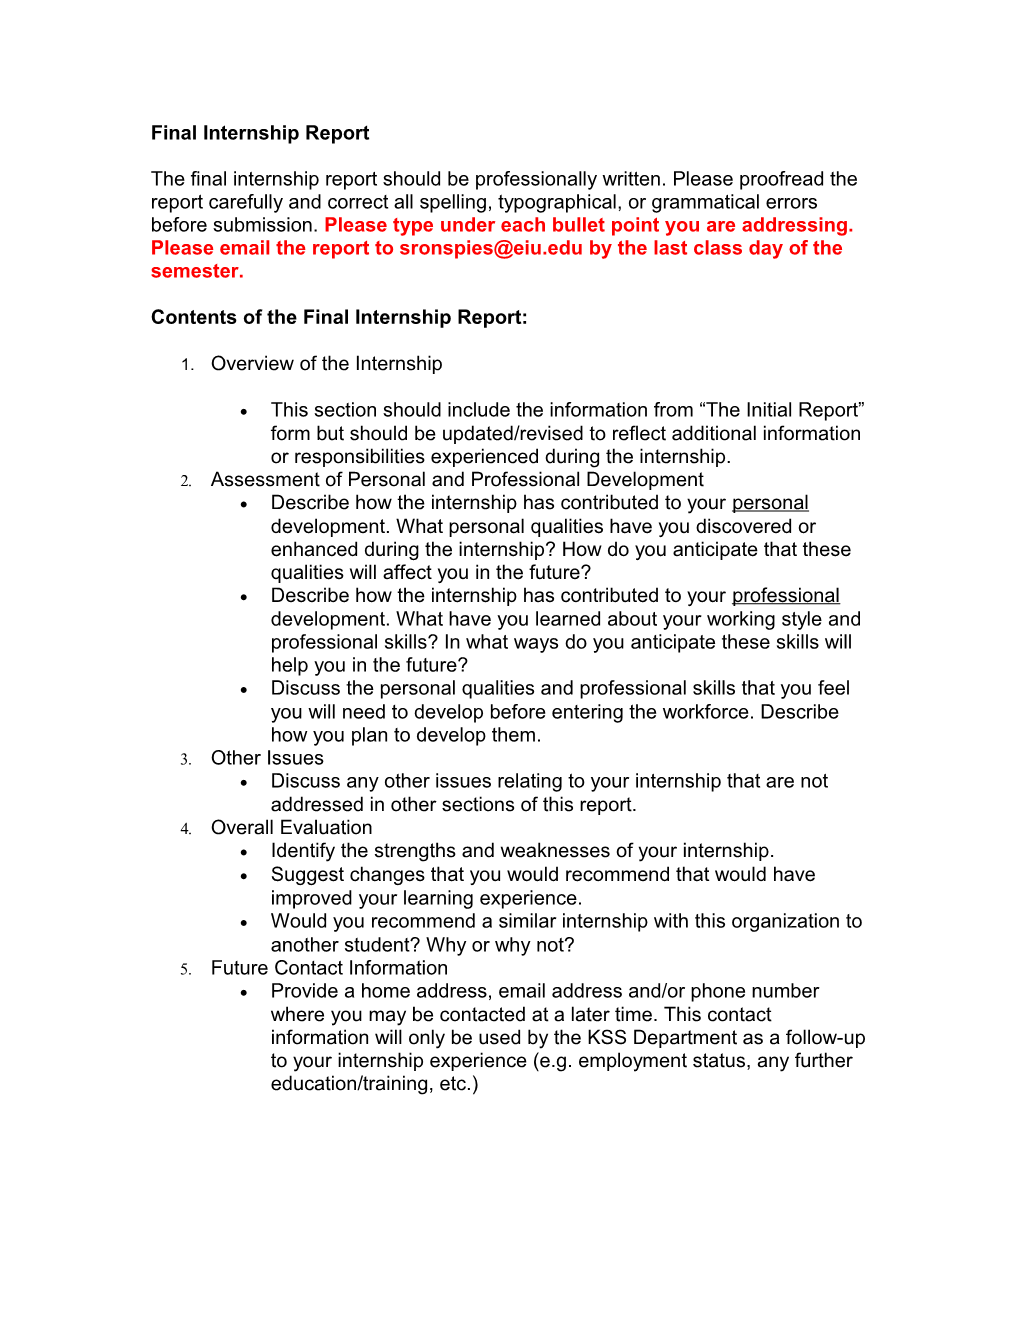 Contents of the Final Internship Report